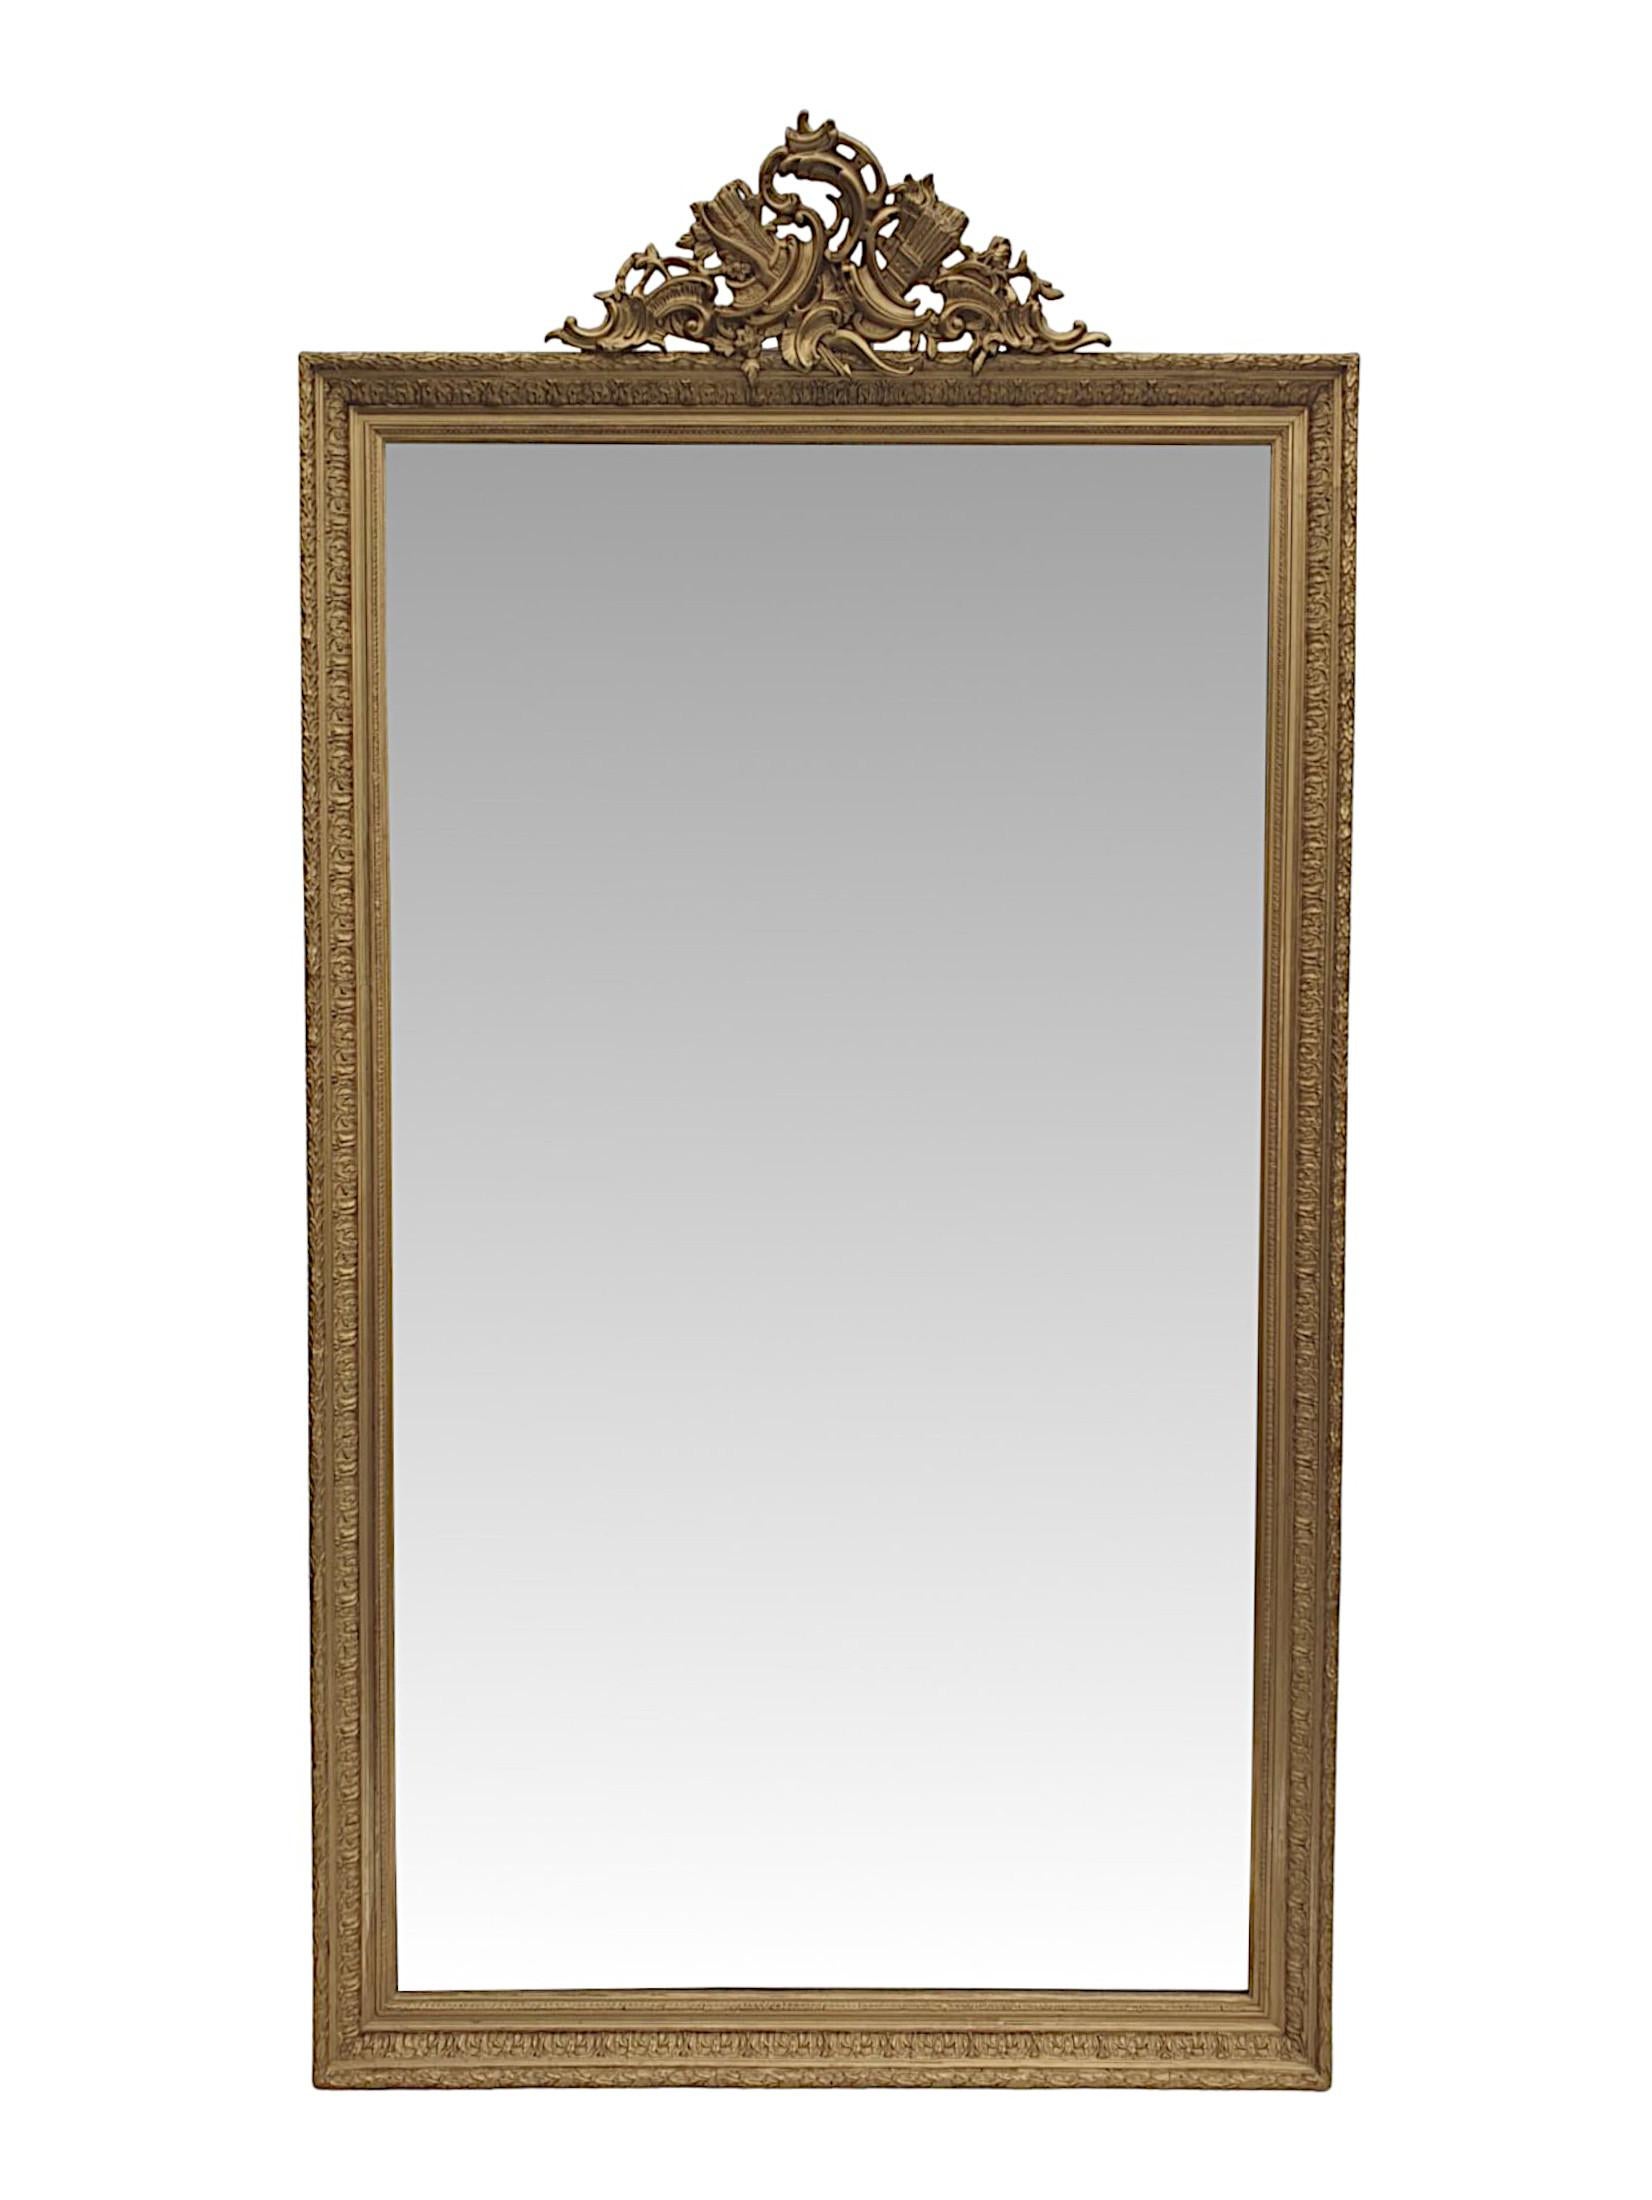 A very rare and fine pair of 19th century overmantle or leaner mirrors of large proportions. The original bevelled mirror glass plate of rectangular form set within a moulded giltwood frame with foliate, flowerhead and leaf motif detail. Surmounted